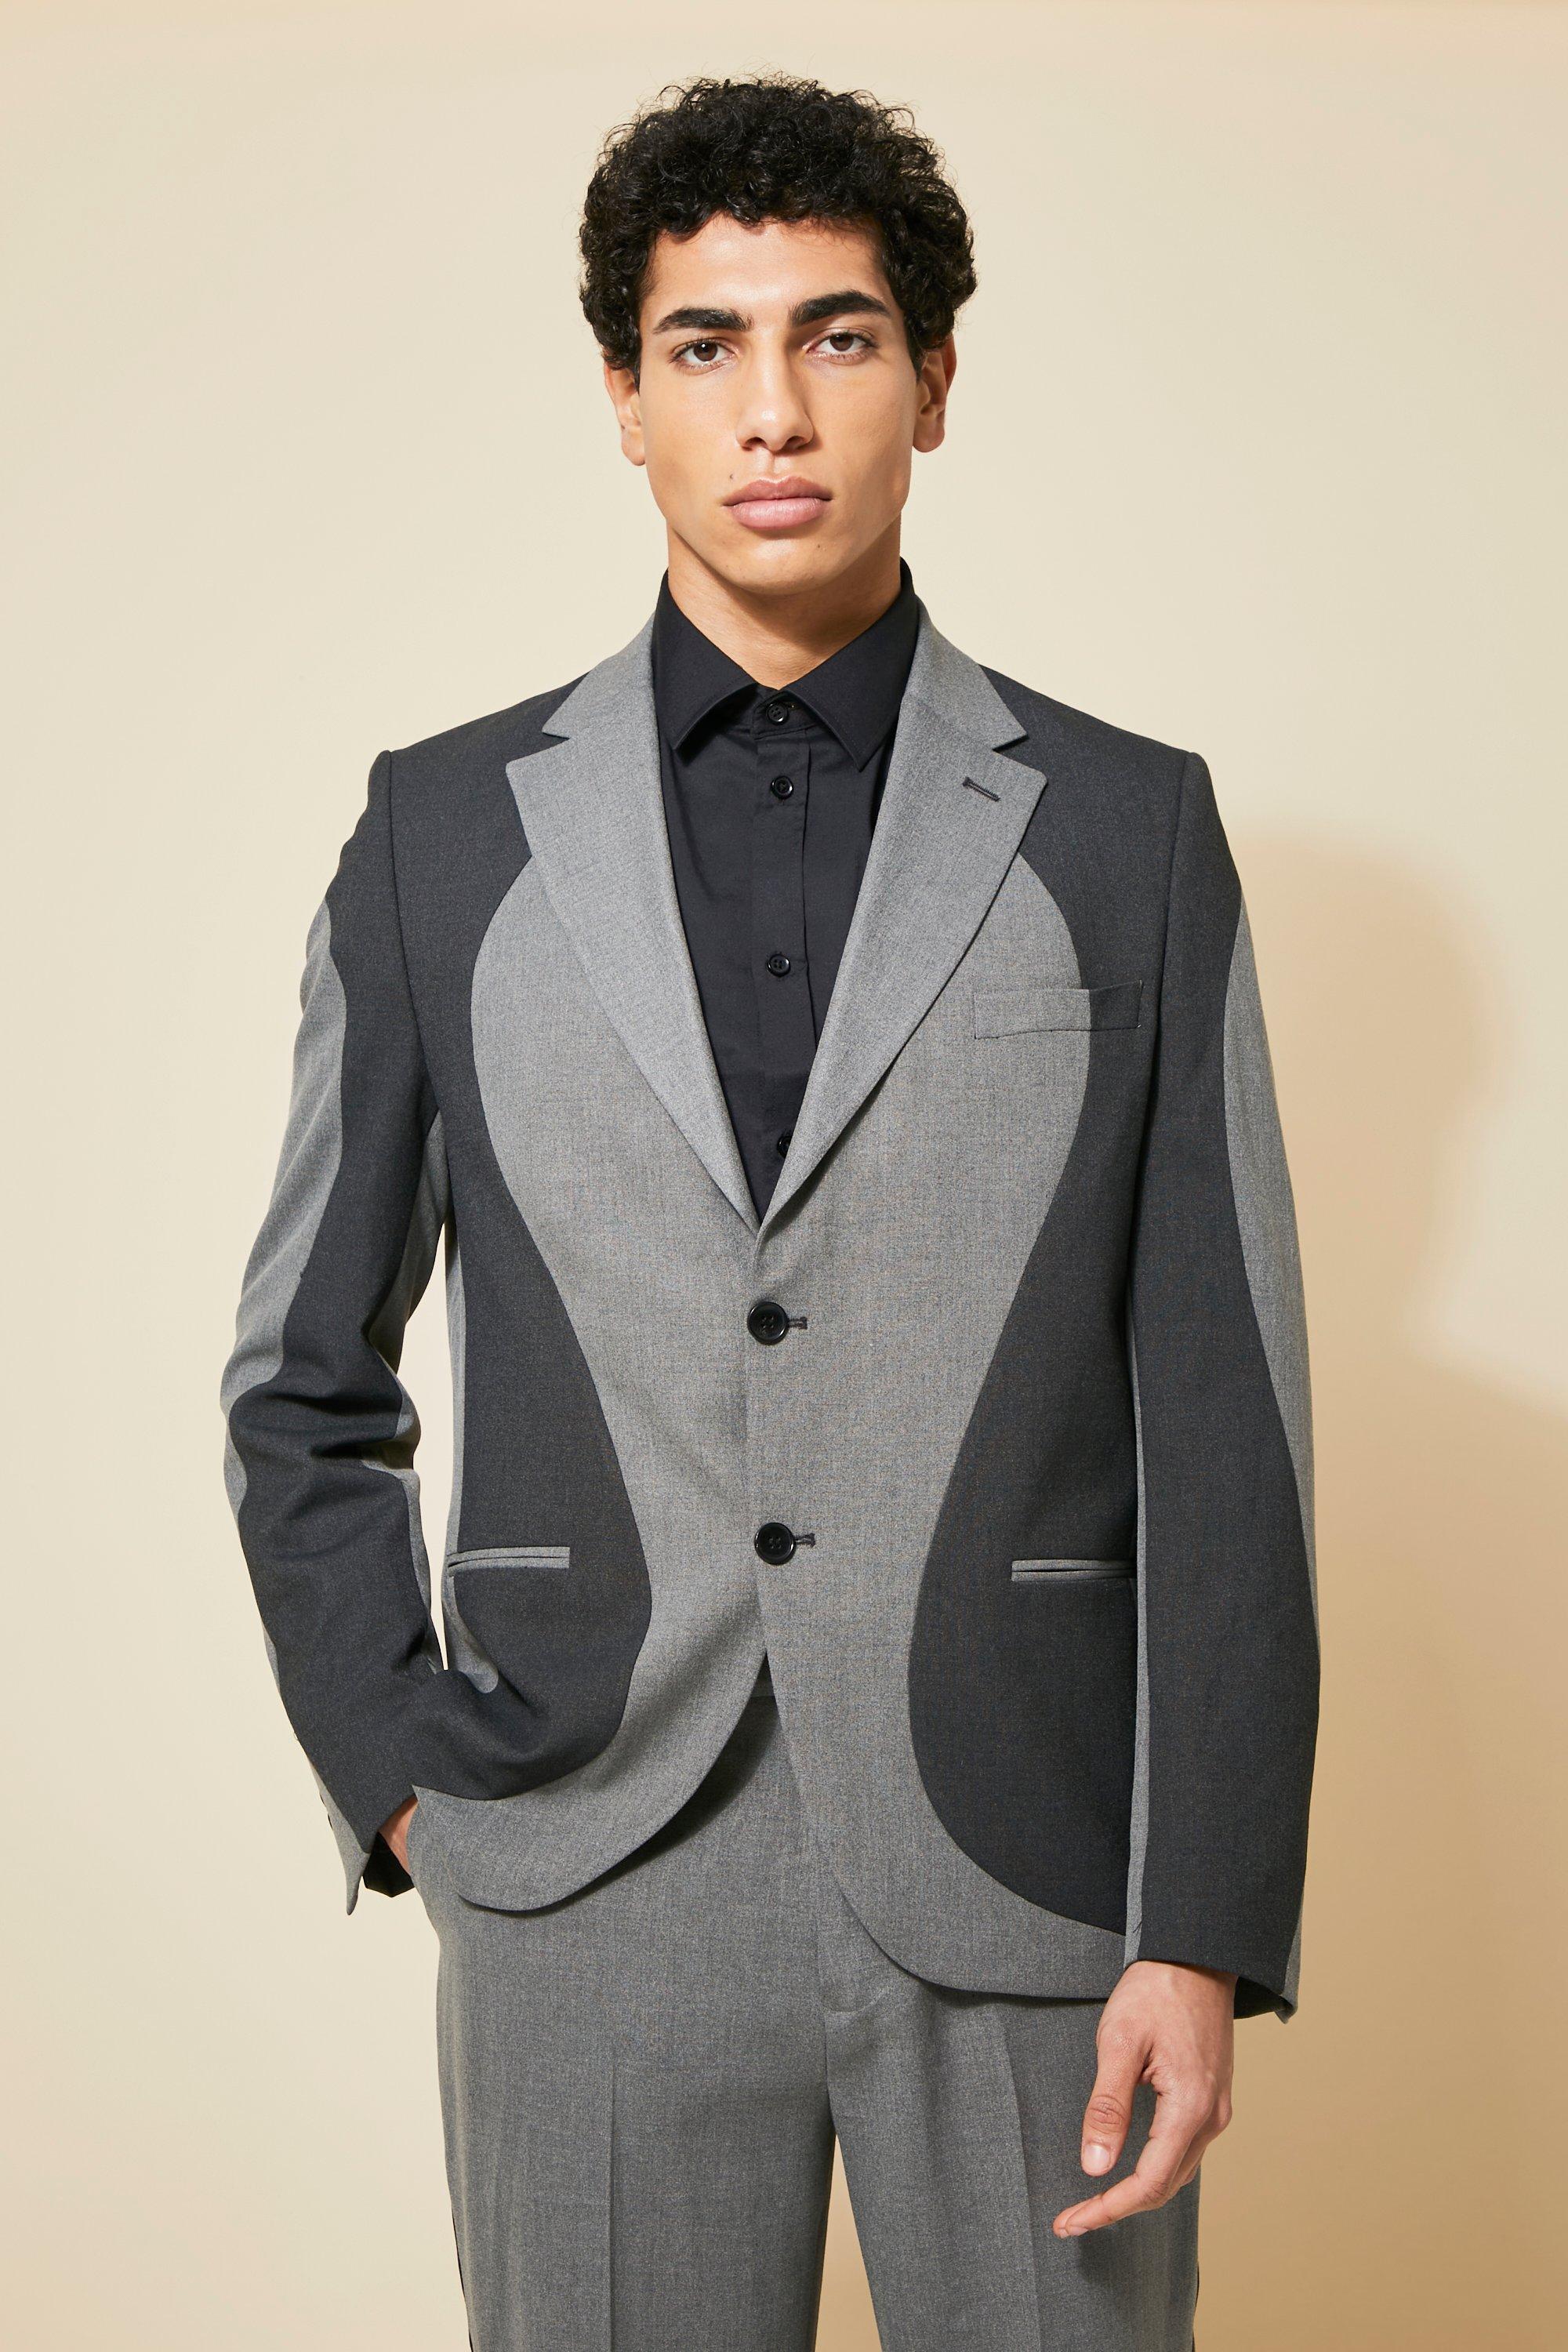 1950s Men’s Clothing & Fashion Mens Single Breasted Relaxed Spliced Suit Jacket - Grey - 40 $120.00 AT vintagedancer.com